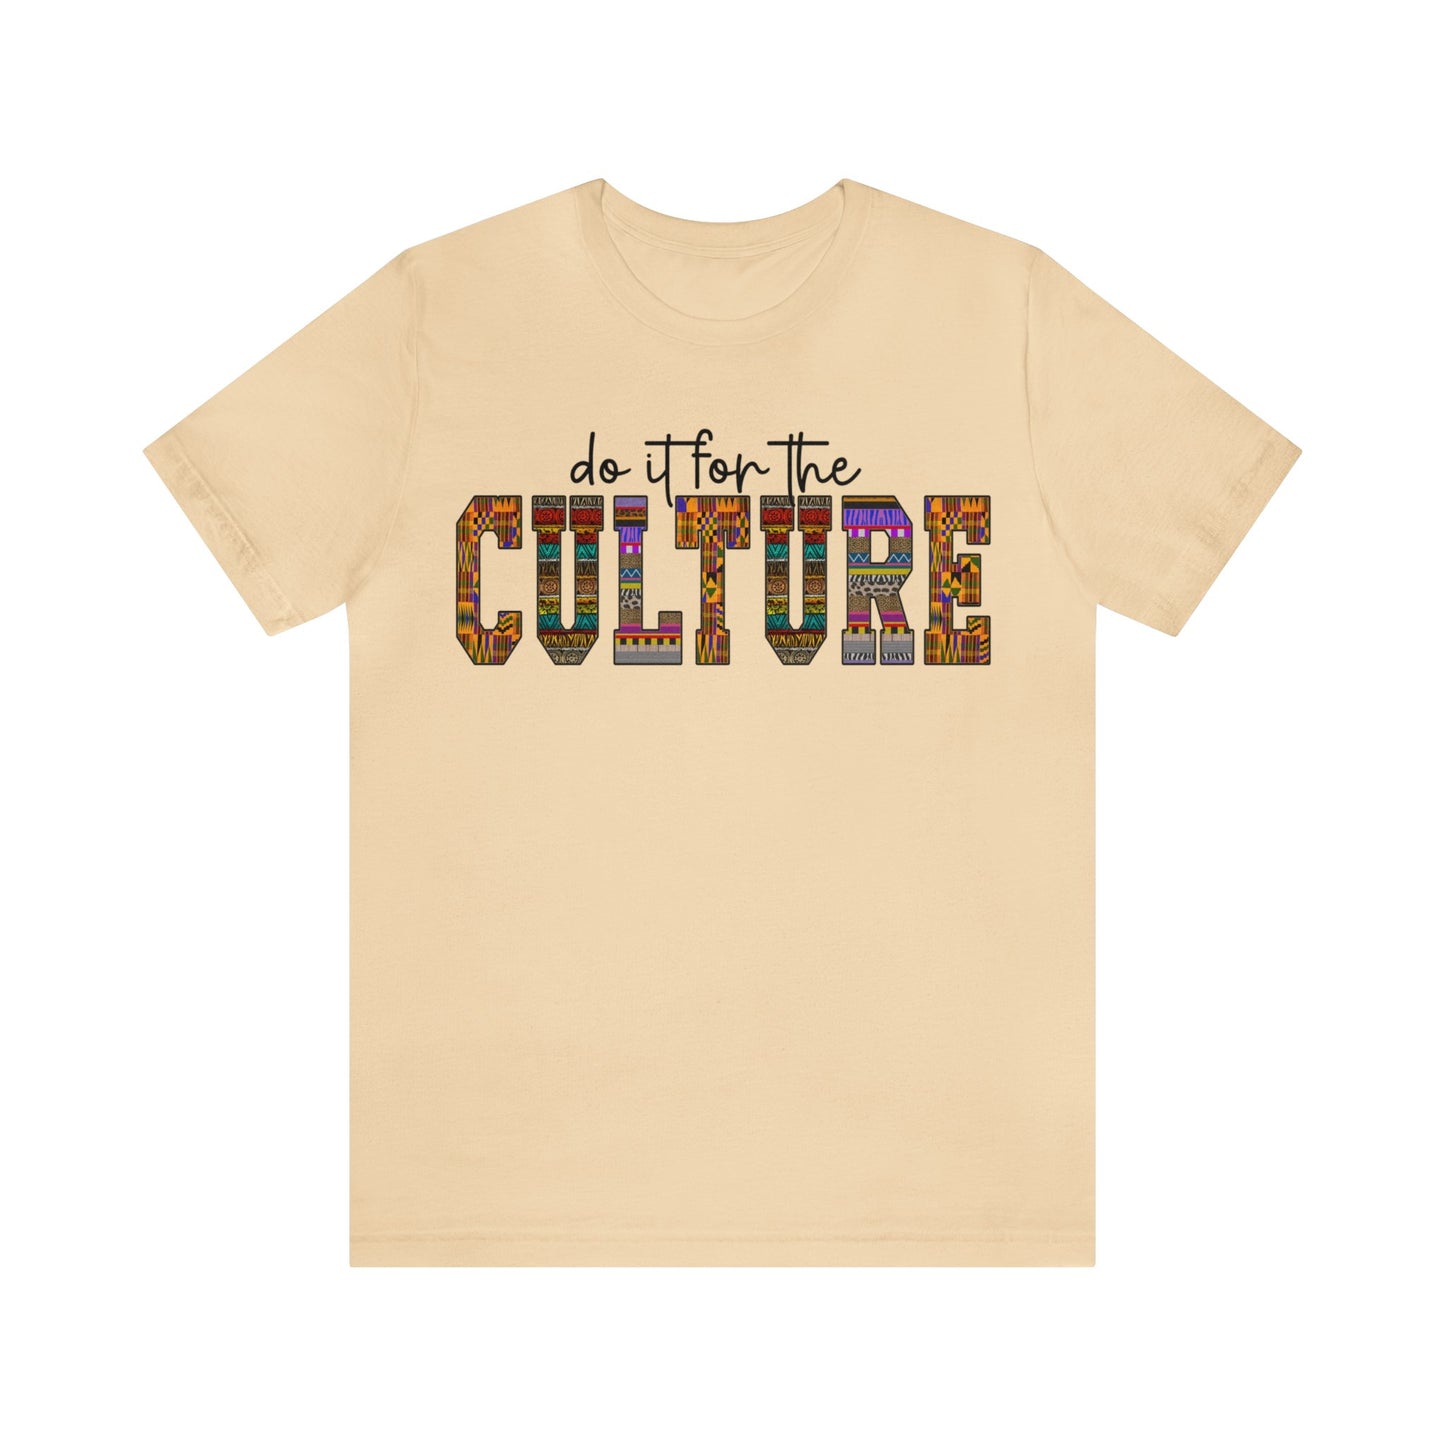 Do It For The Culture Unisex Adult Tee